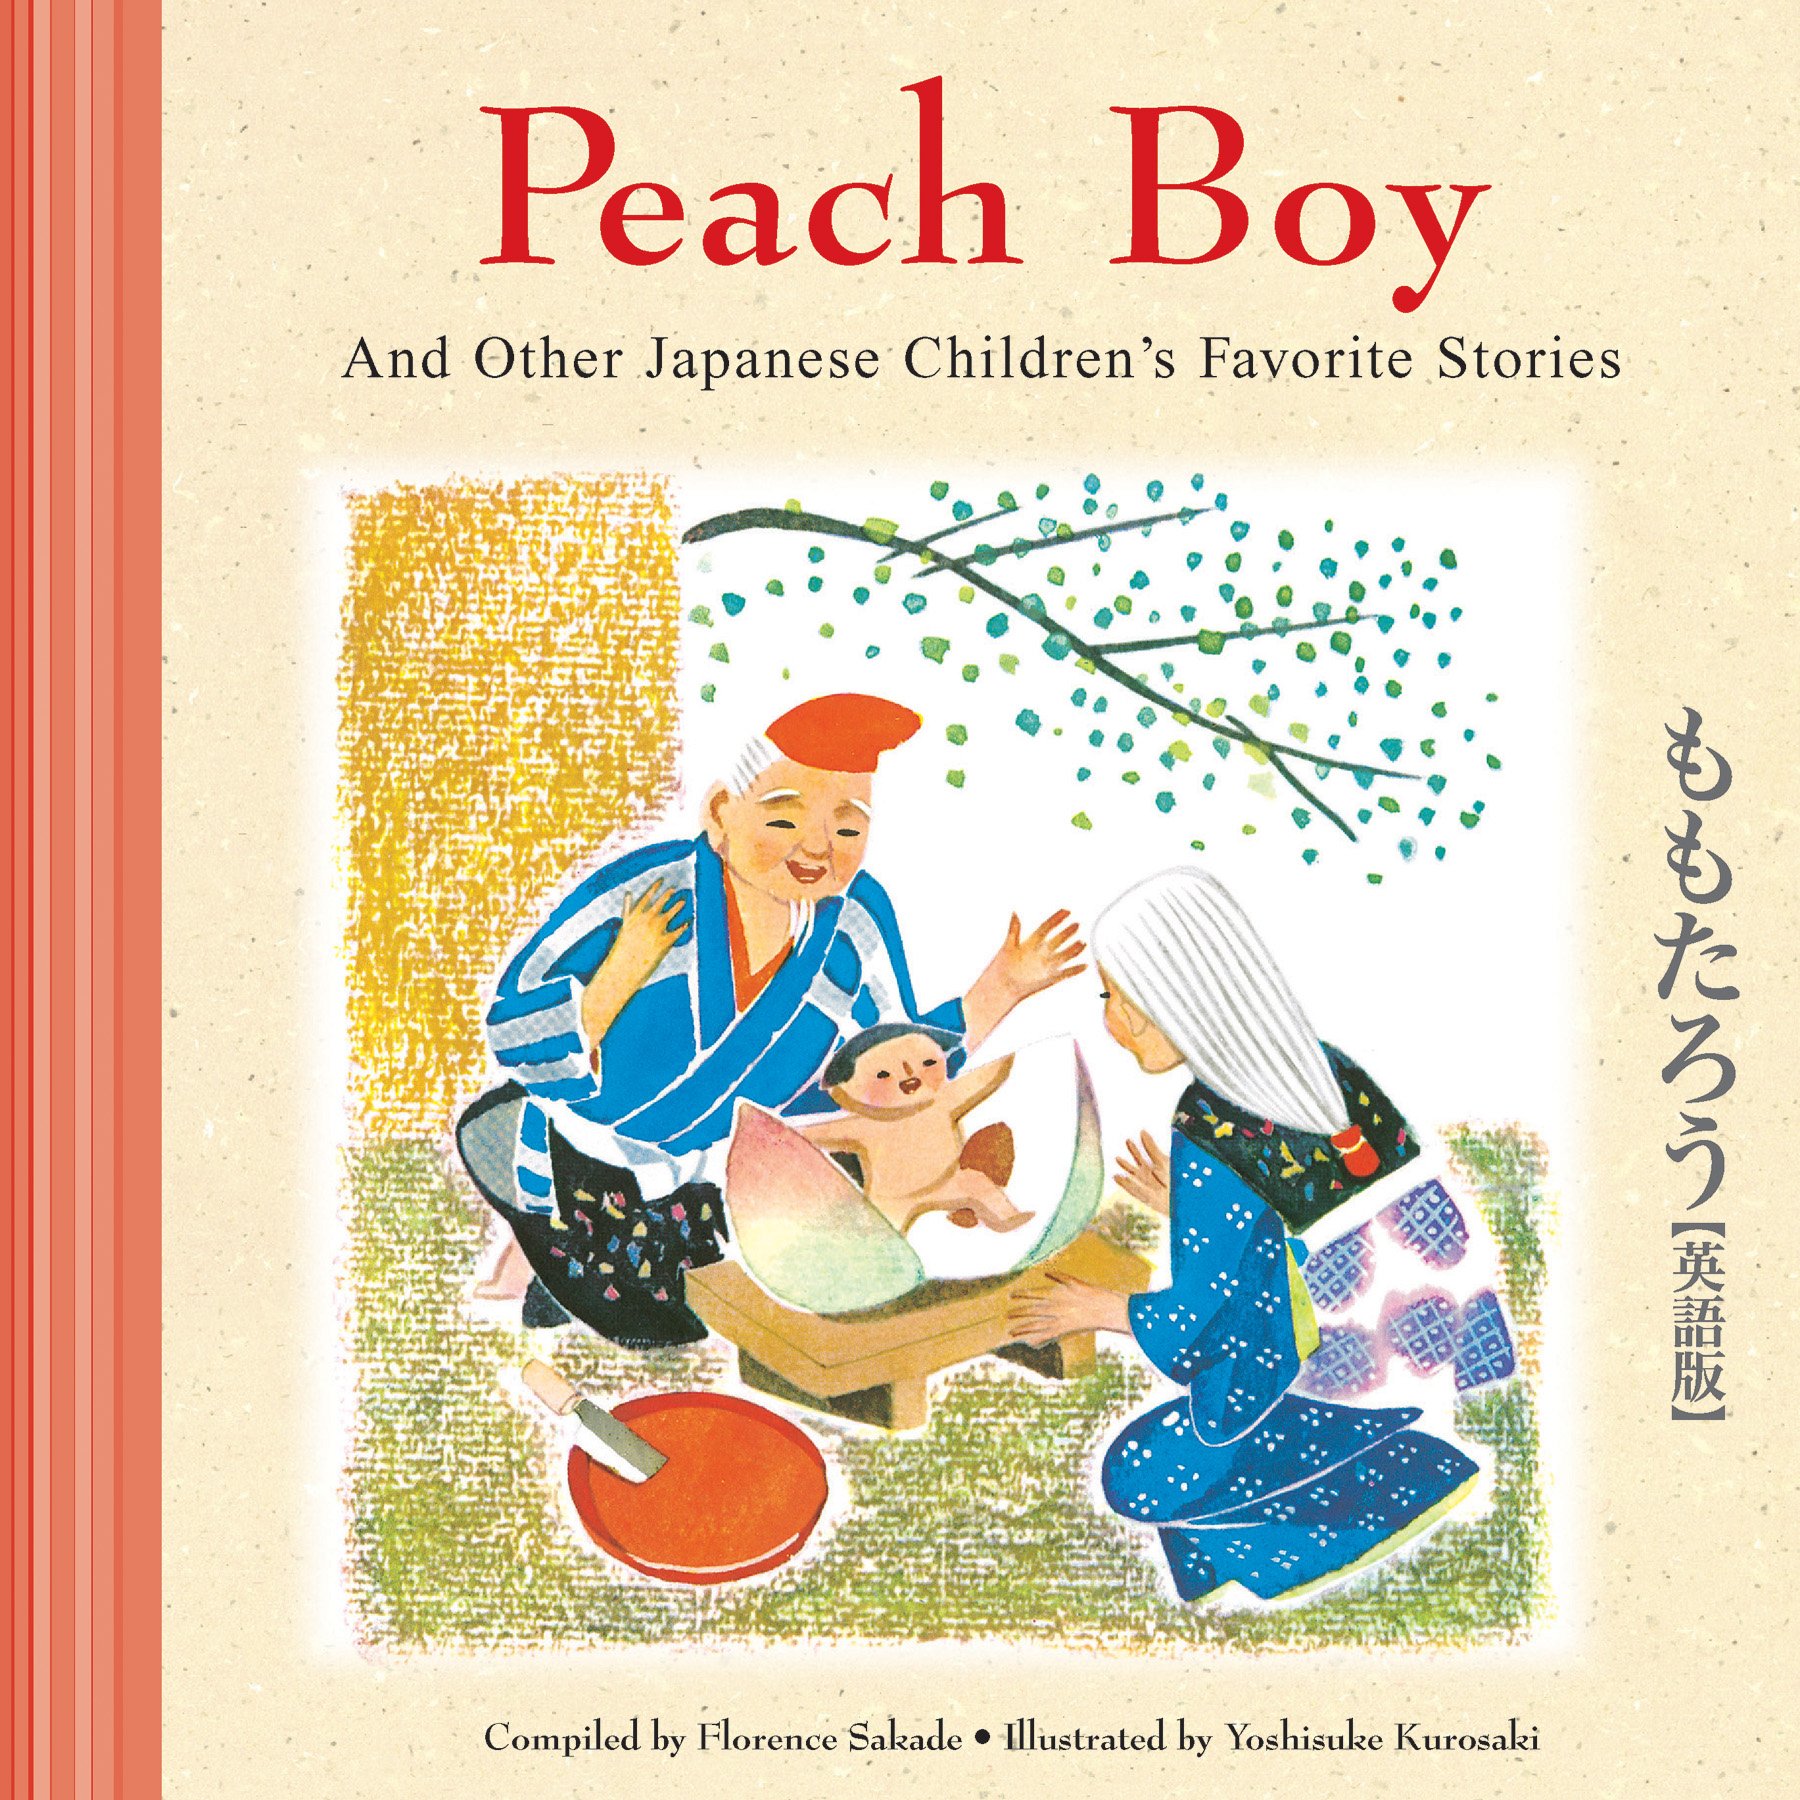 Peach Boy and Other Japanese Children’s Favorite Stories